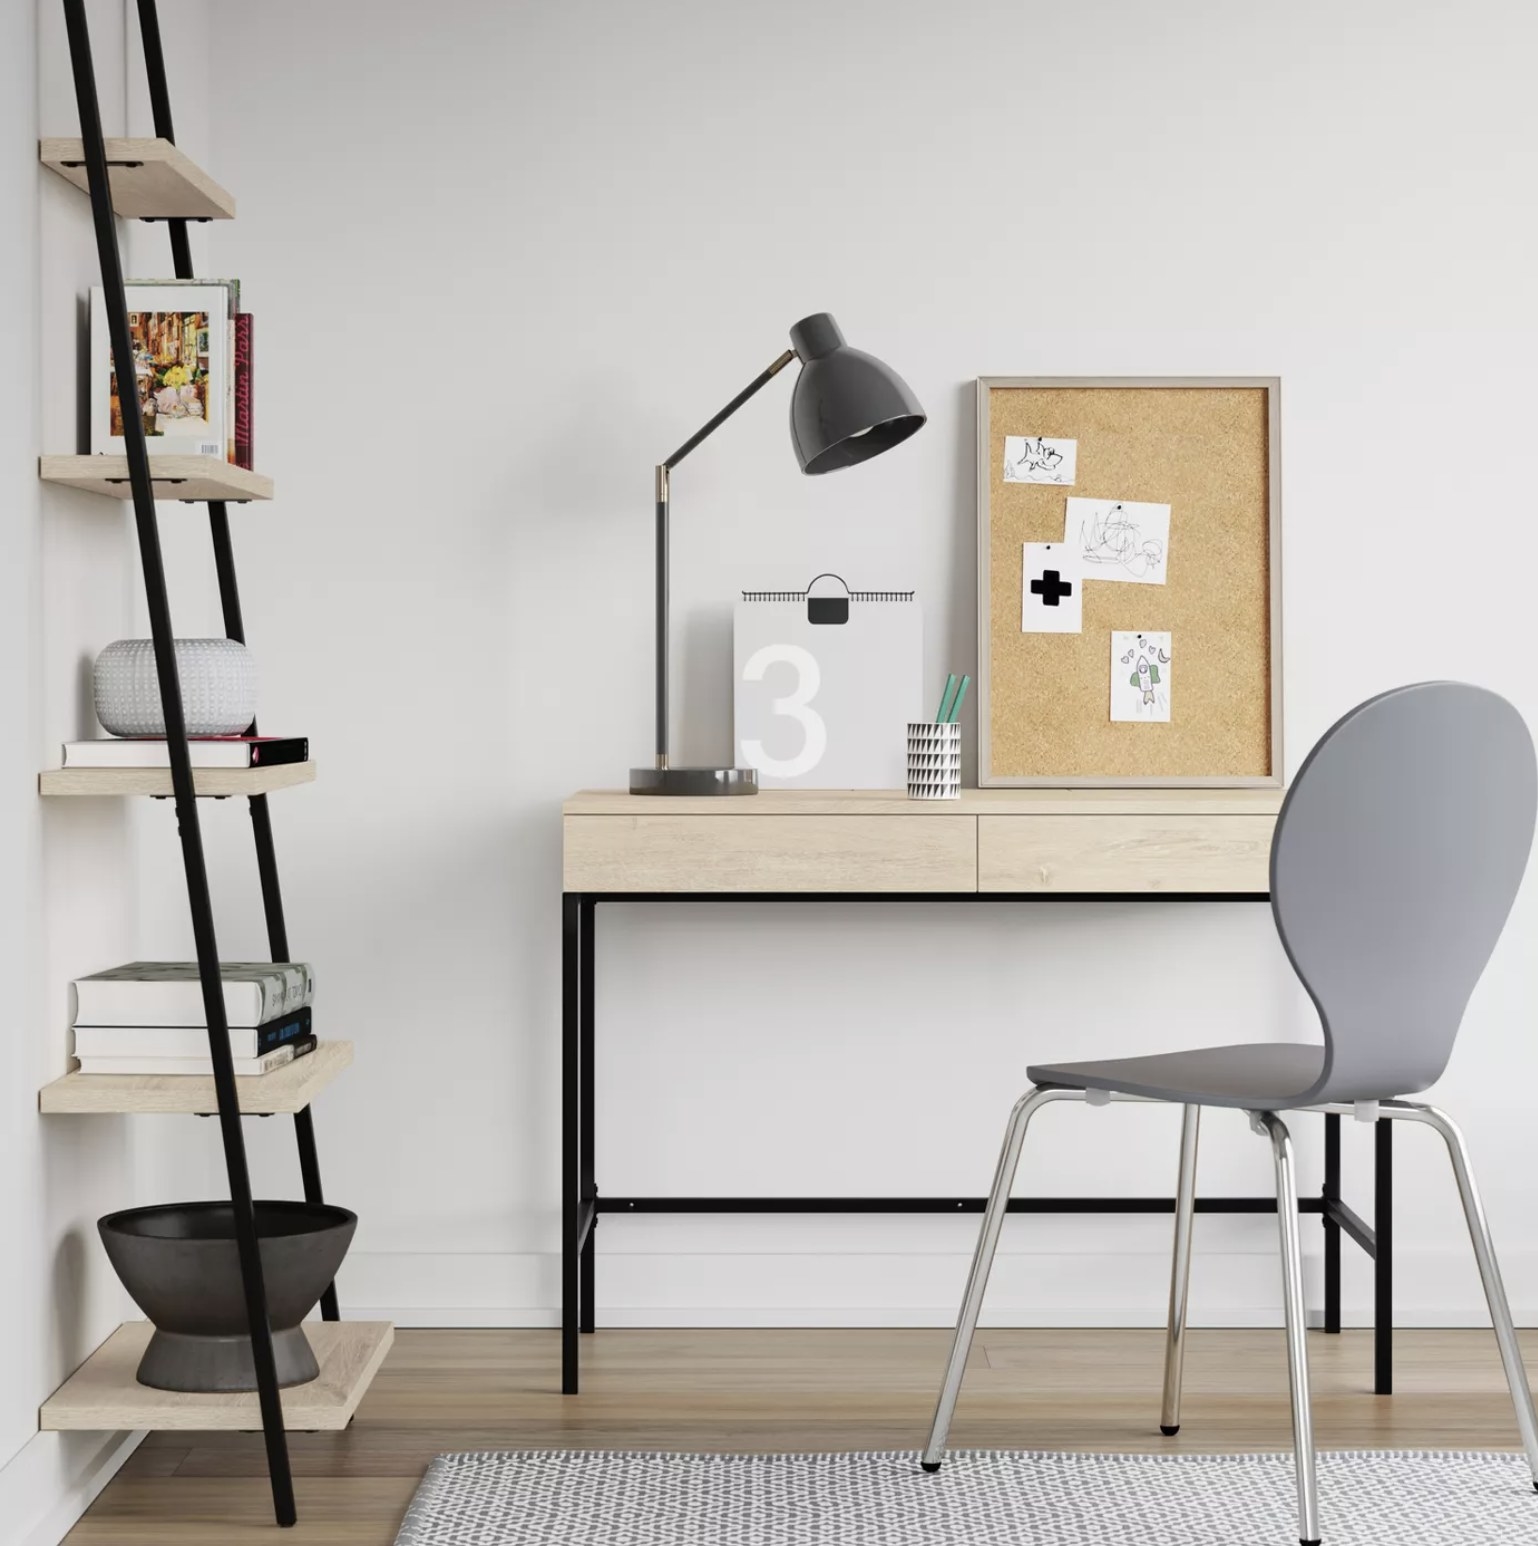 A leaning ladder bookshelf in an office space